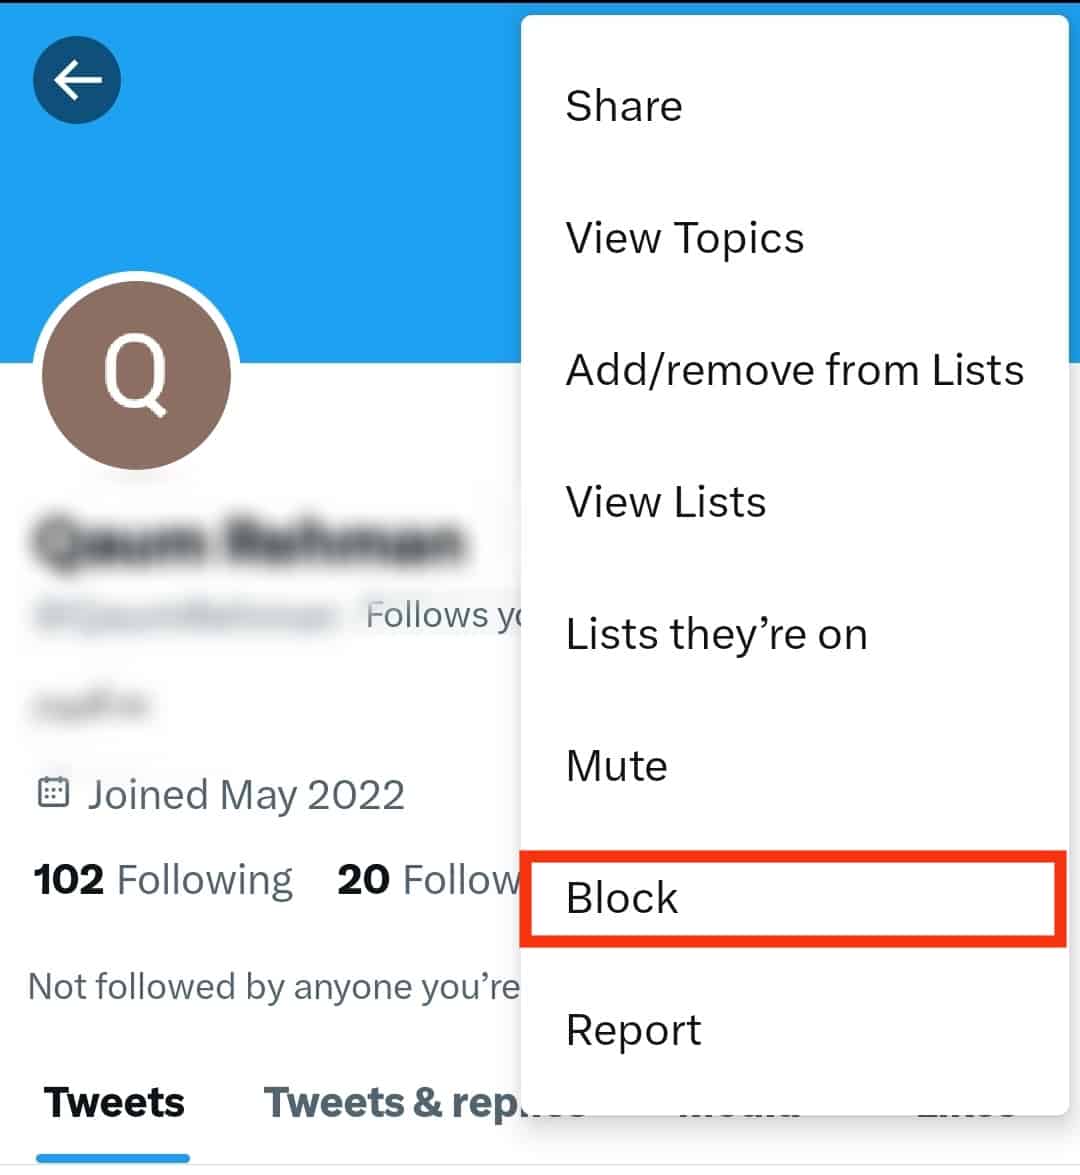 Click On The Block Option